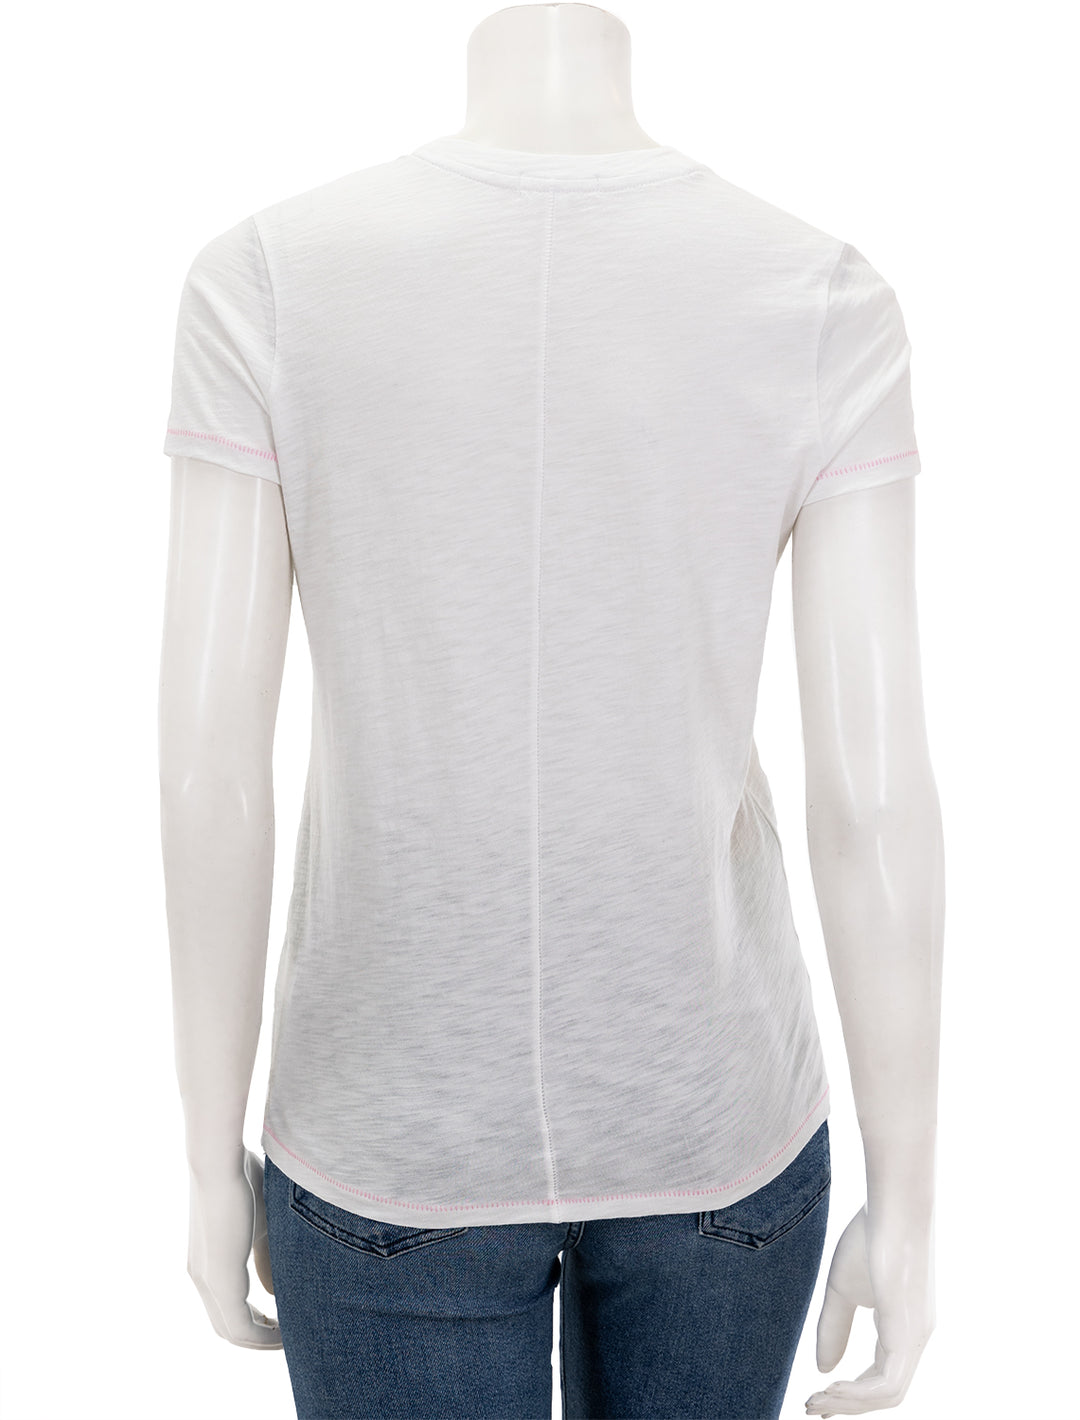 Back view of Goldie Lewinter's contrast stitch pocket boy tee in white and pink.